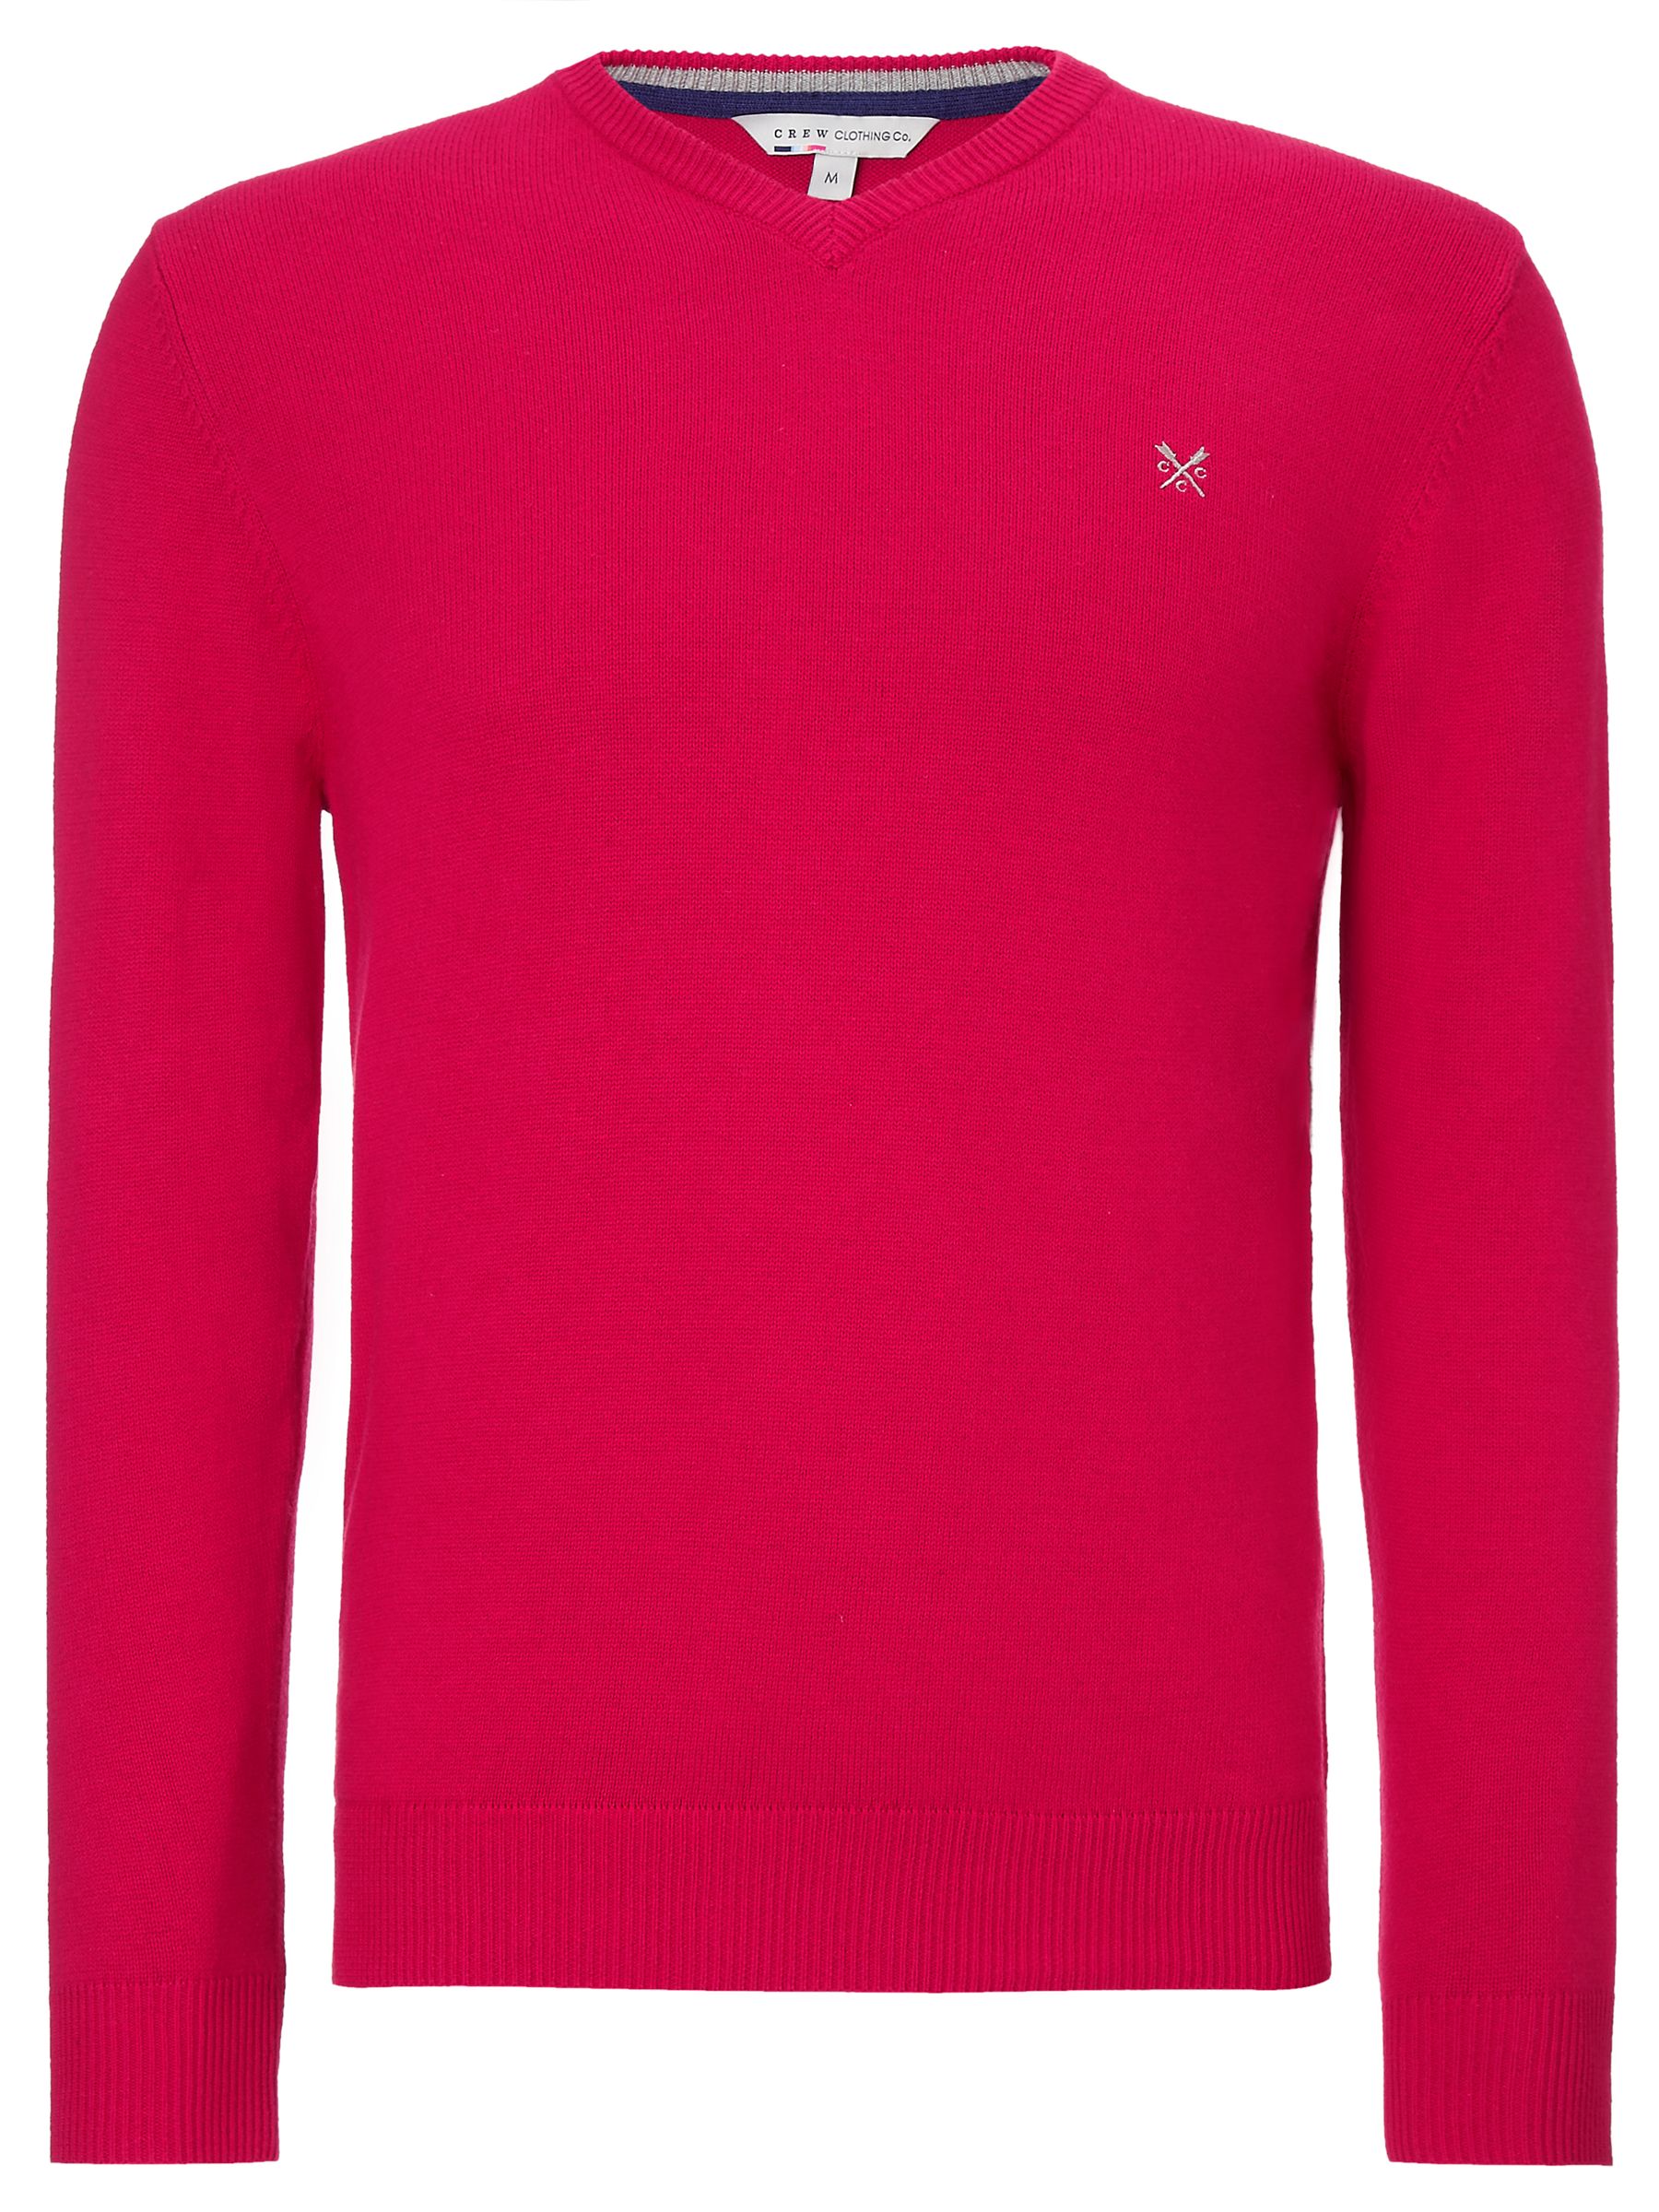 Buy Crew Clothing Foxley Knit V Neck Jumper, Red online at JohnLewis 